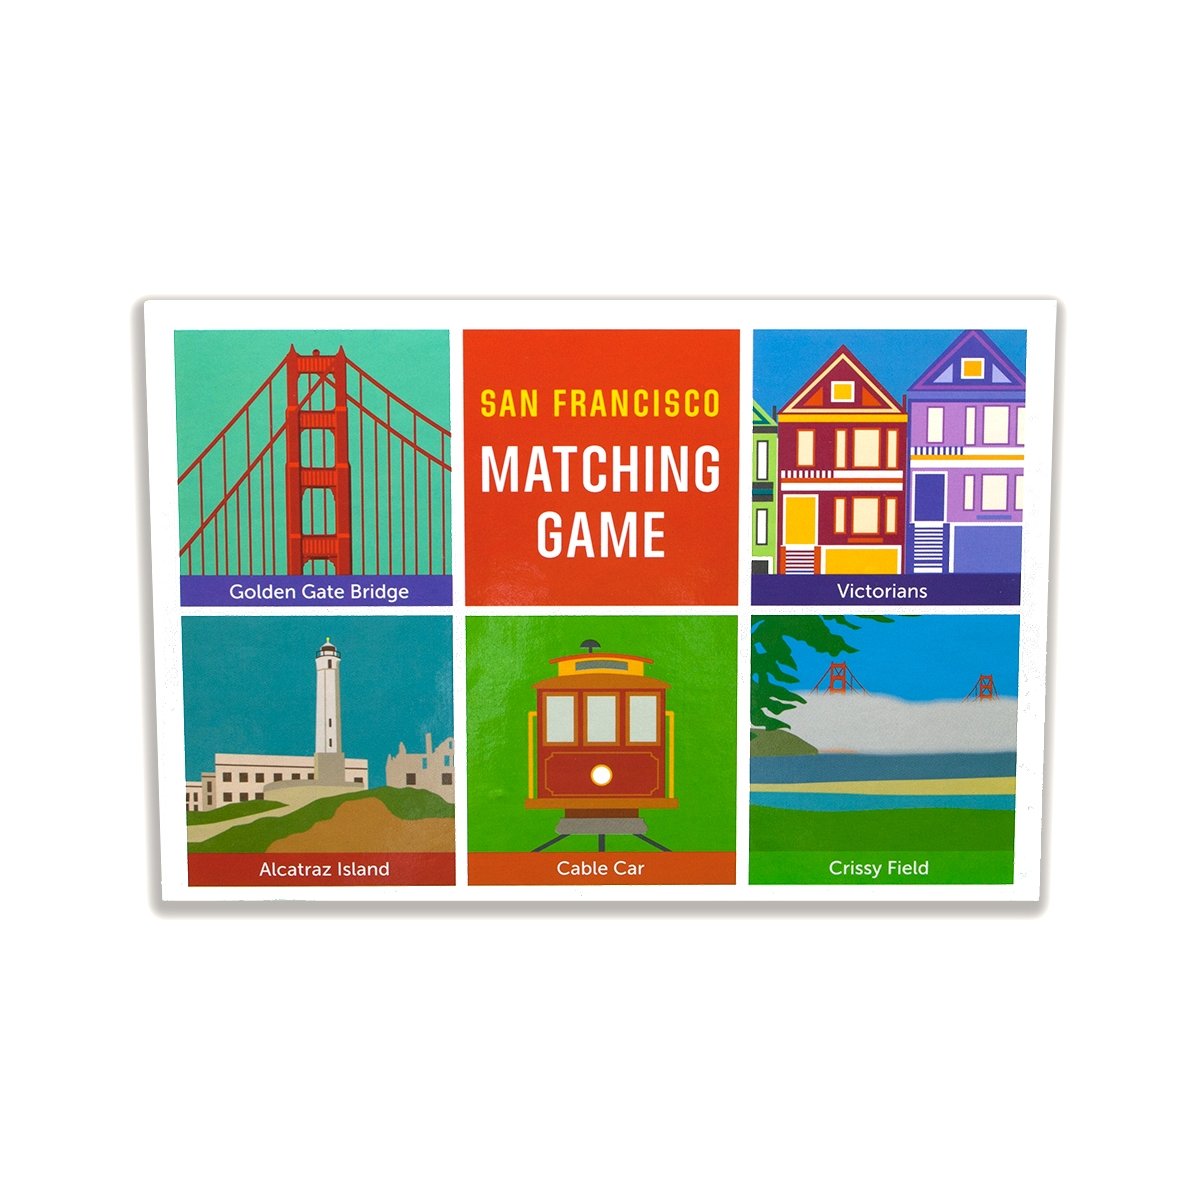 San Francisco matching game, featuring Golden Gate Bridge, cable cars, Alcatraz, and more. Set of 24 cards.